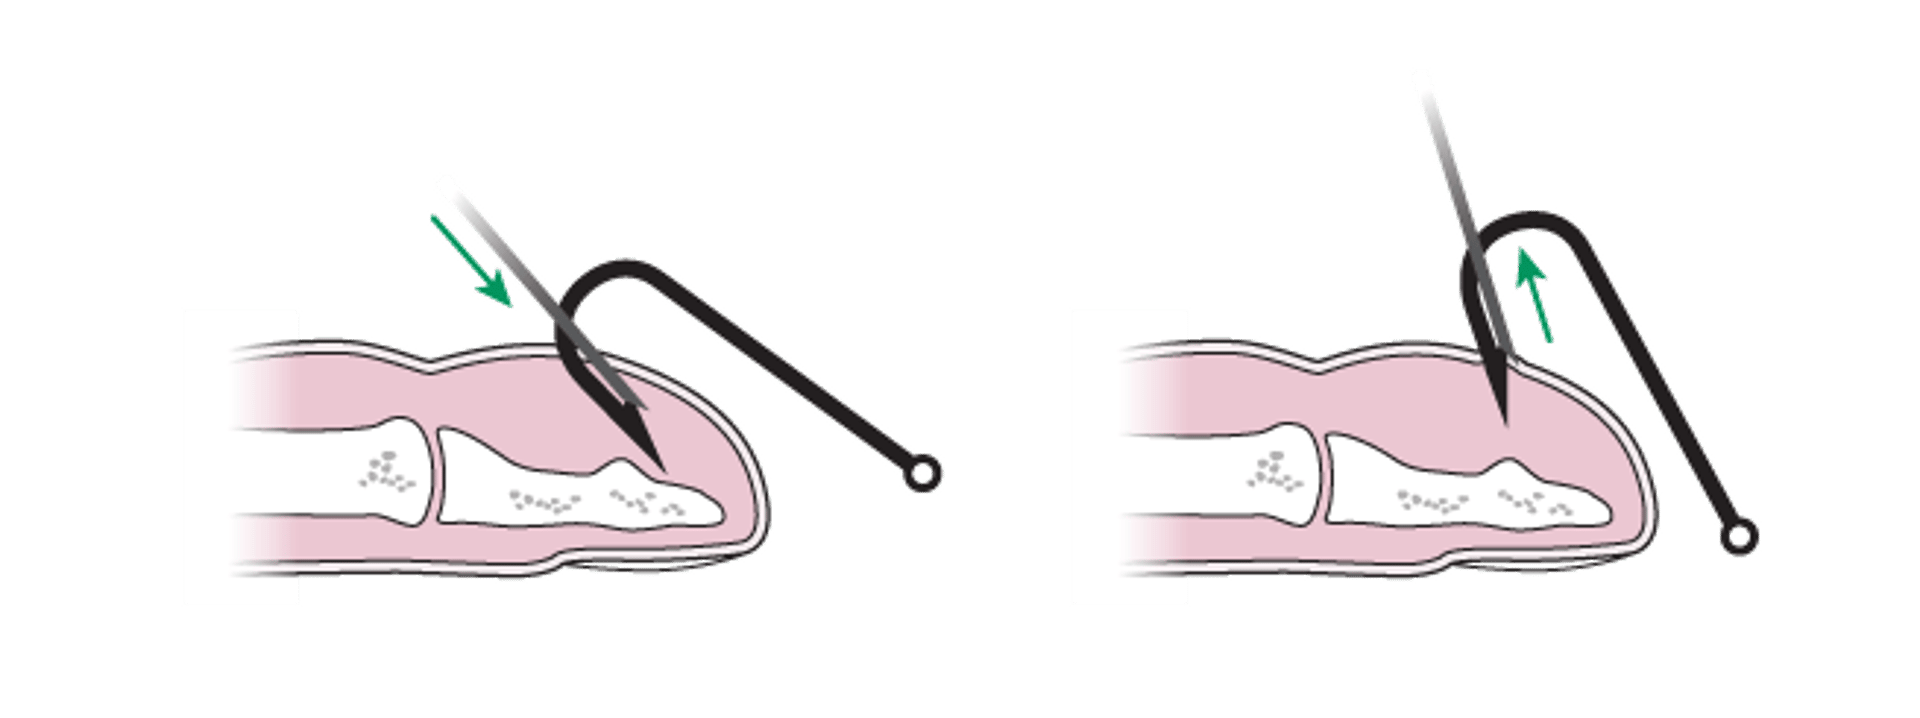 Fish hook removal: Needle cover method